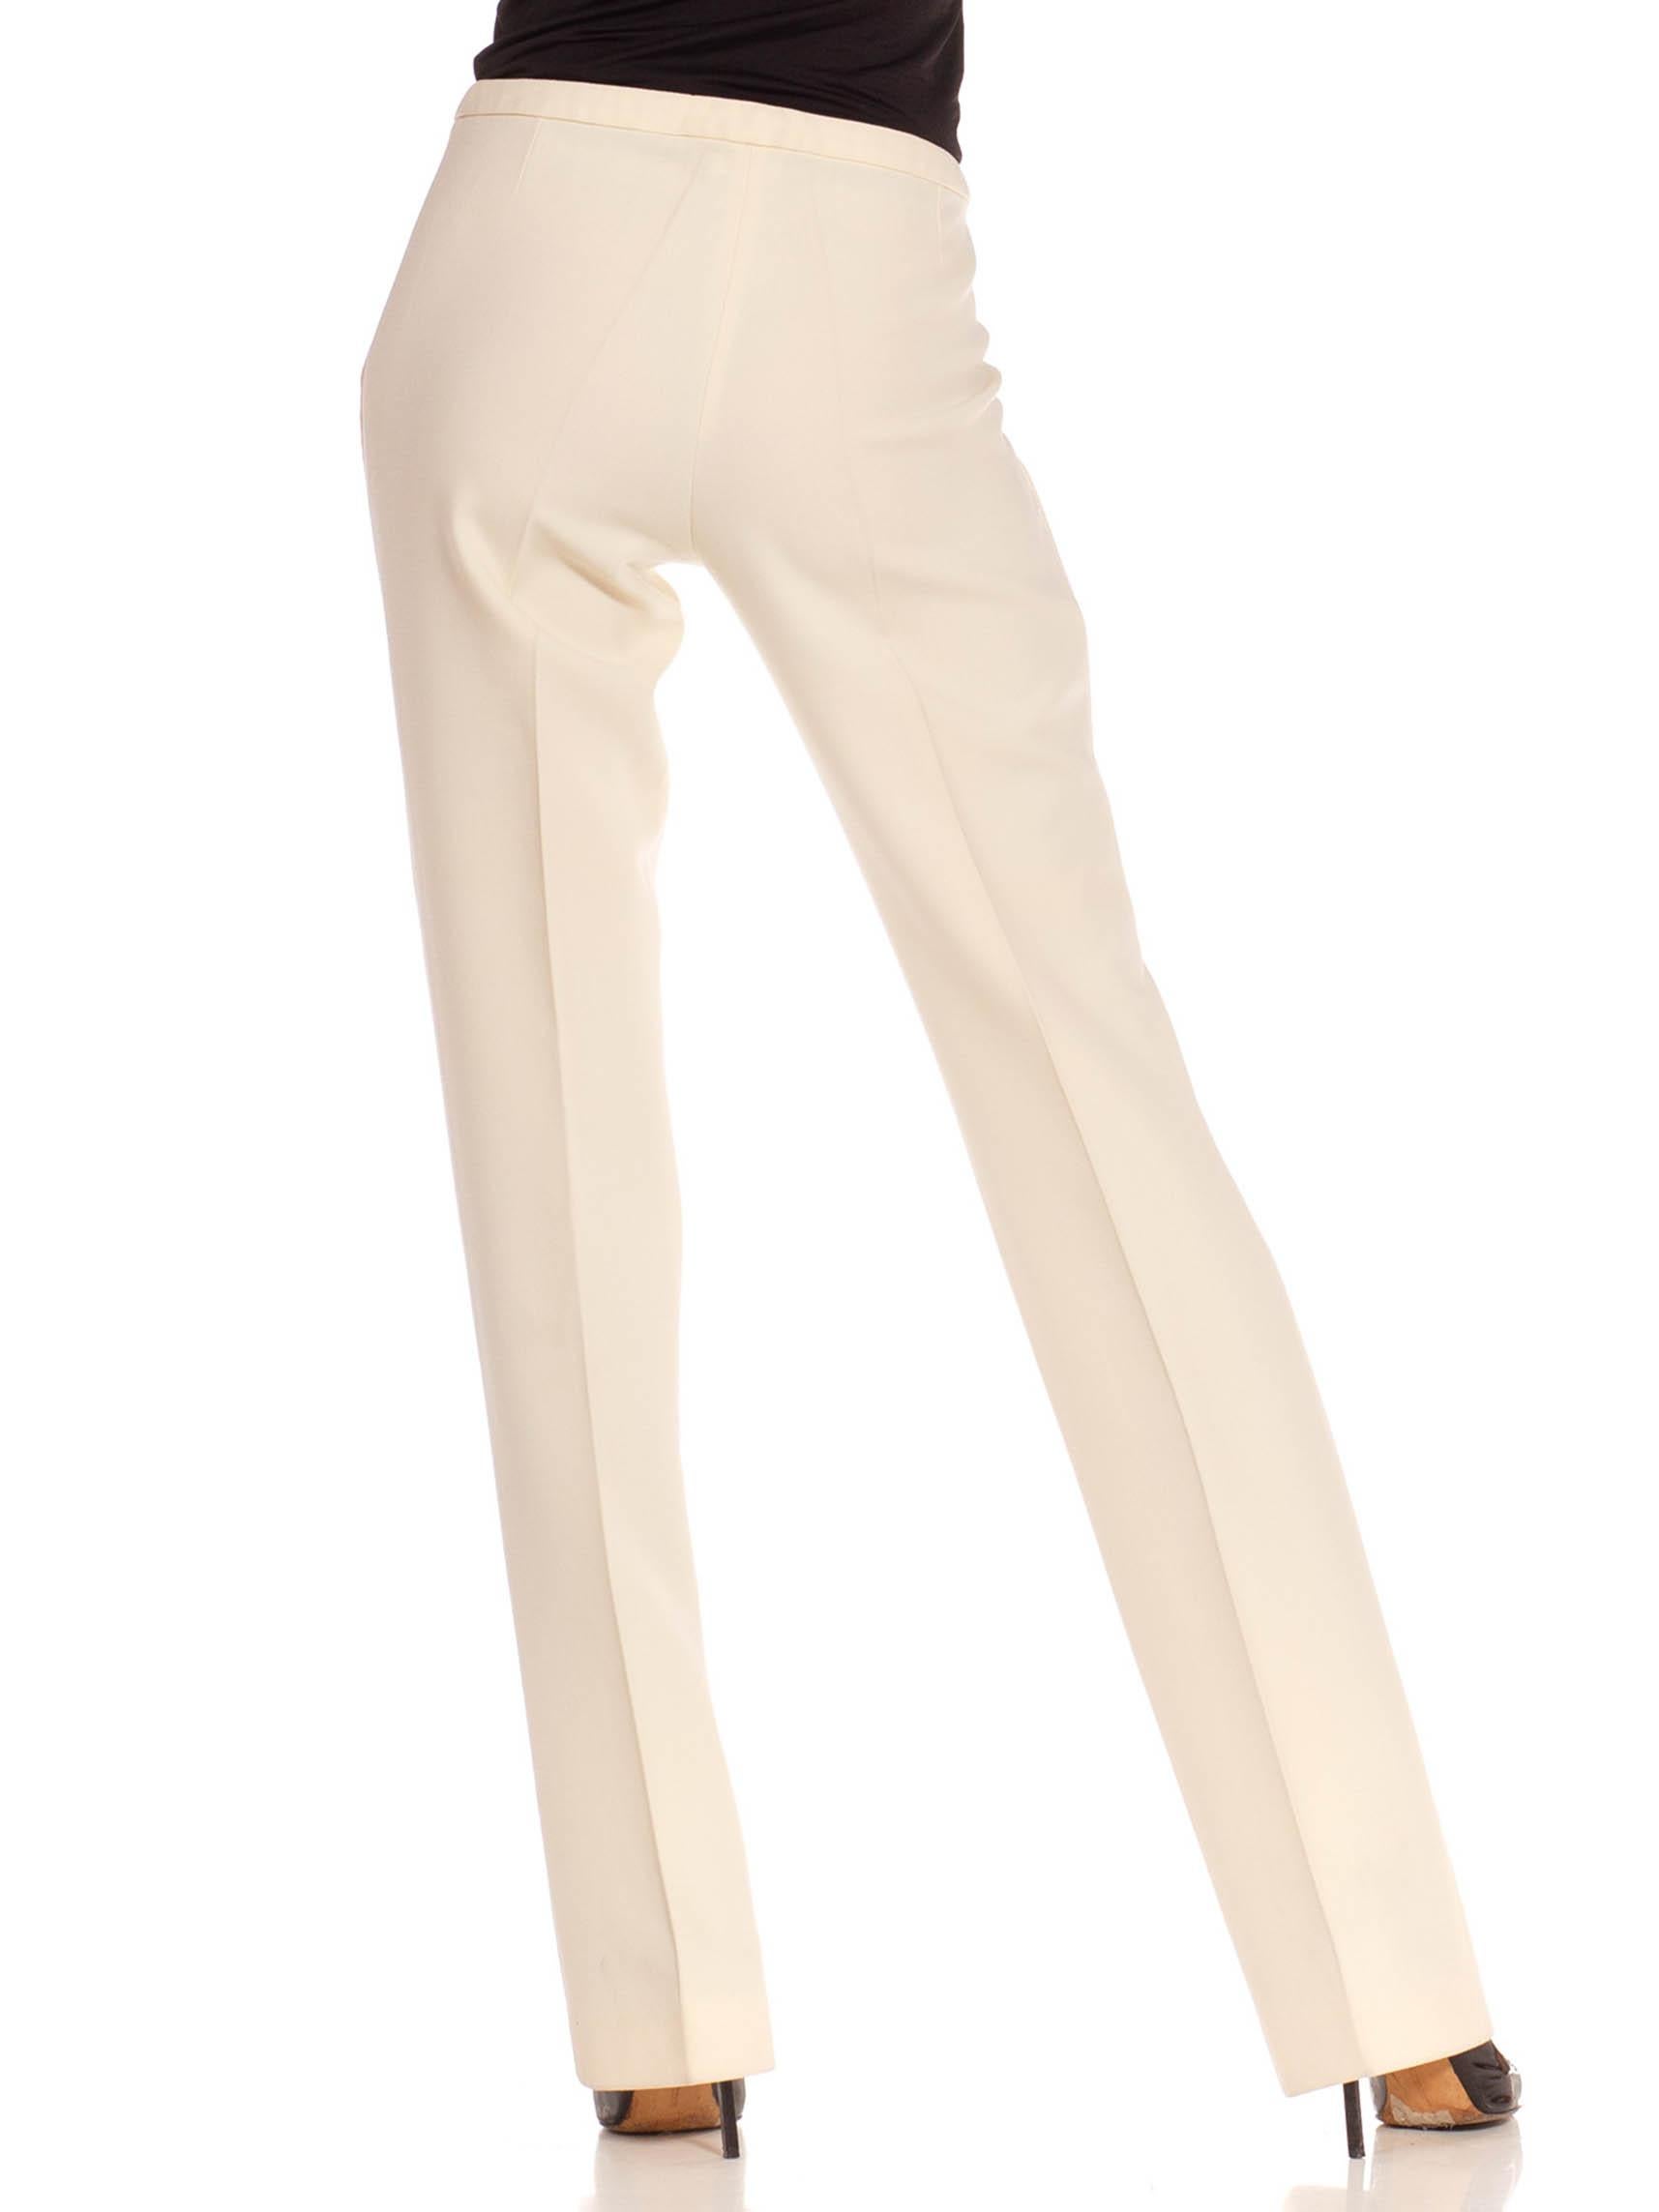 White 1990S Gianni Versace Cream Wool Crepe Cigarette Pants For Sale